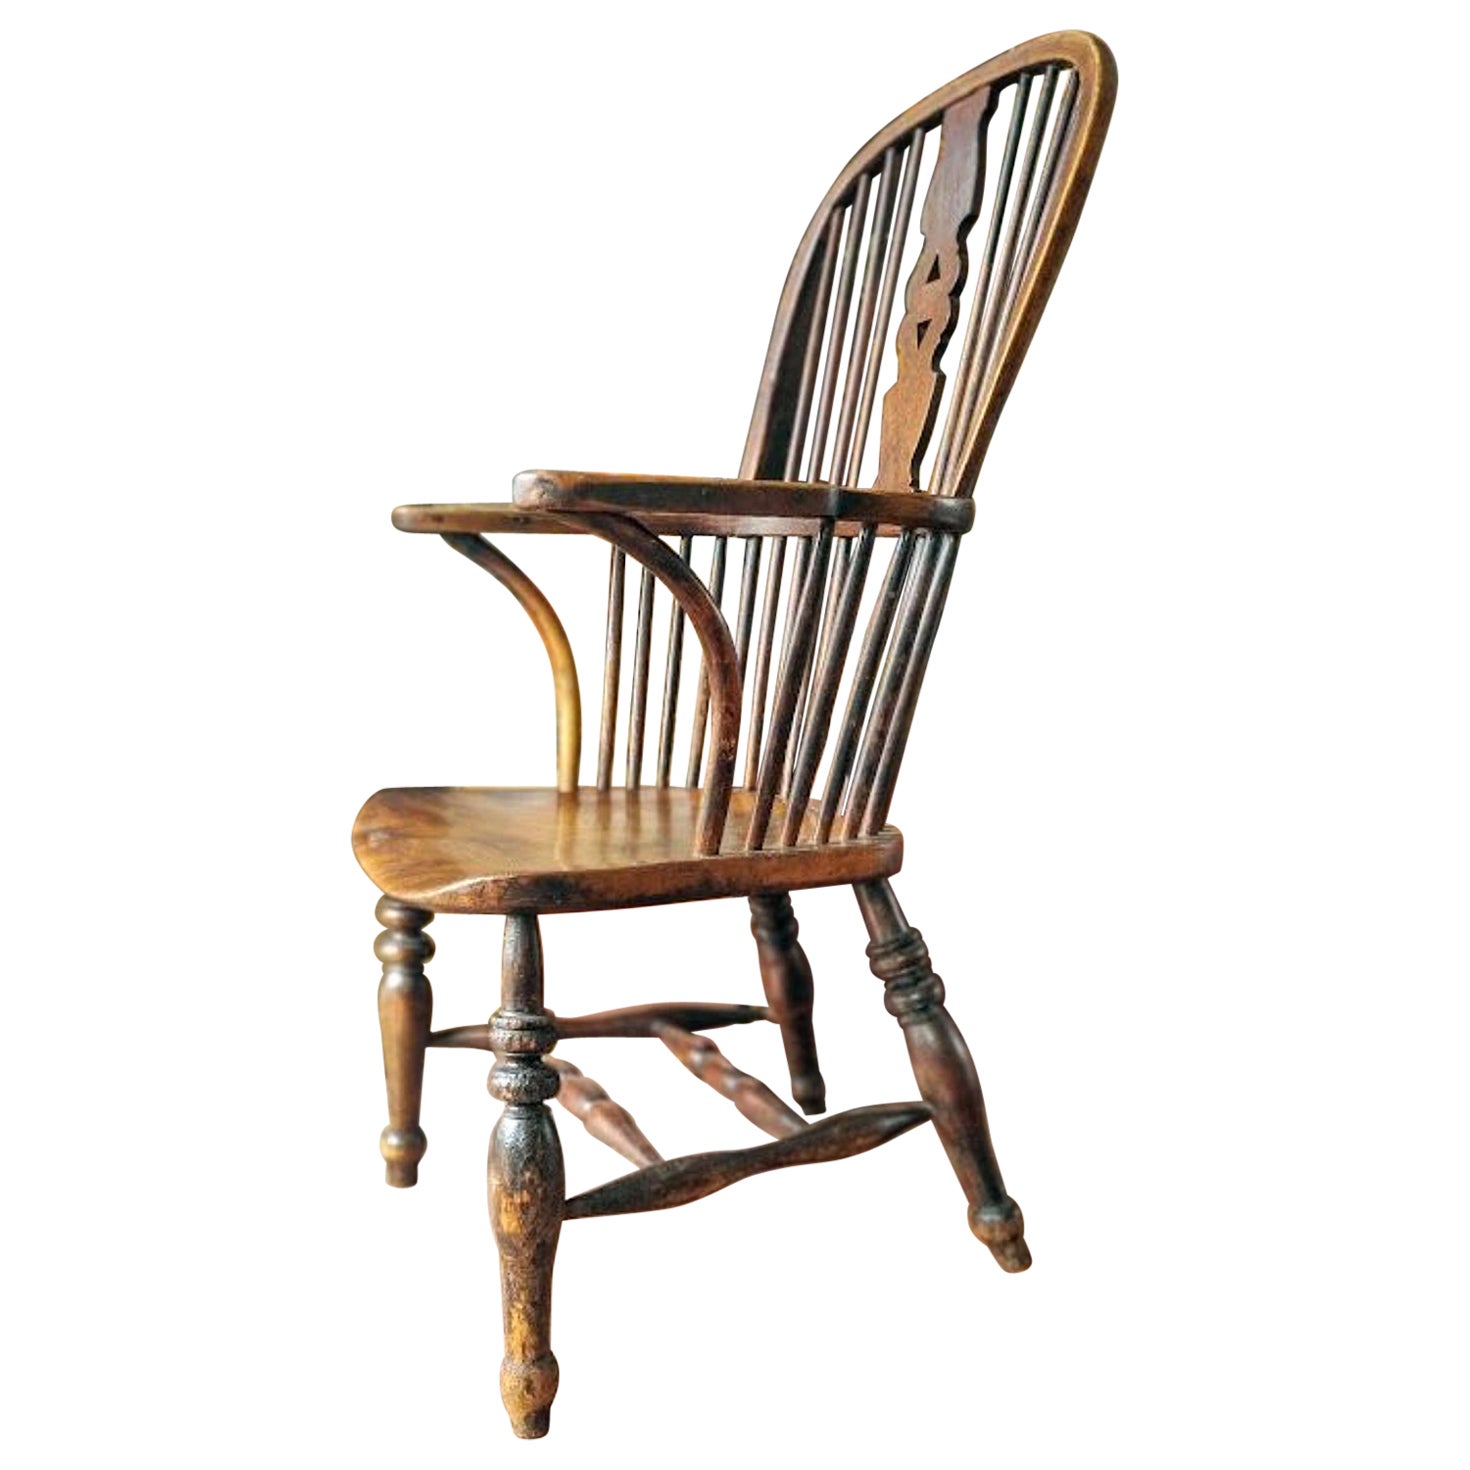 19th Century High Back Elm and Yew Wood Thames Valley Windsor Chair